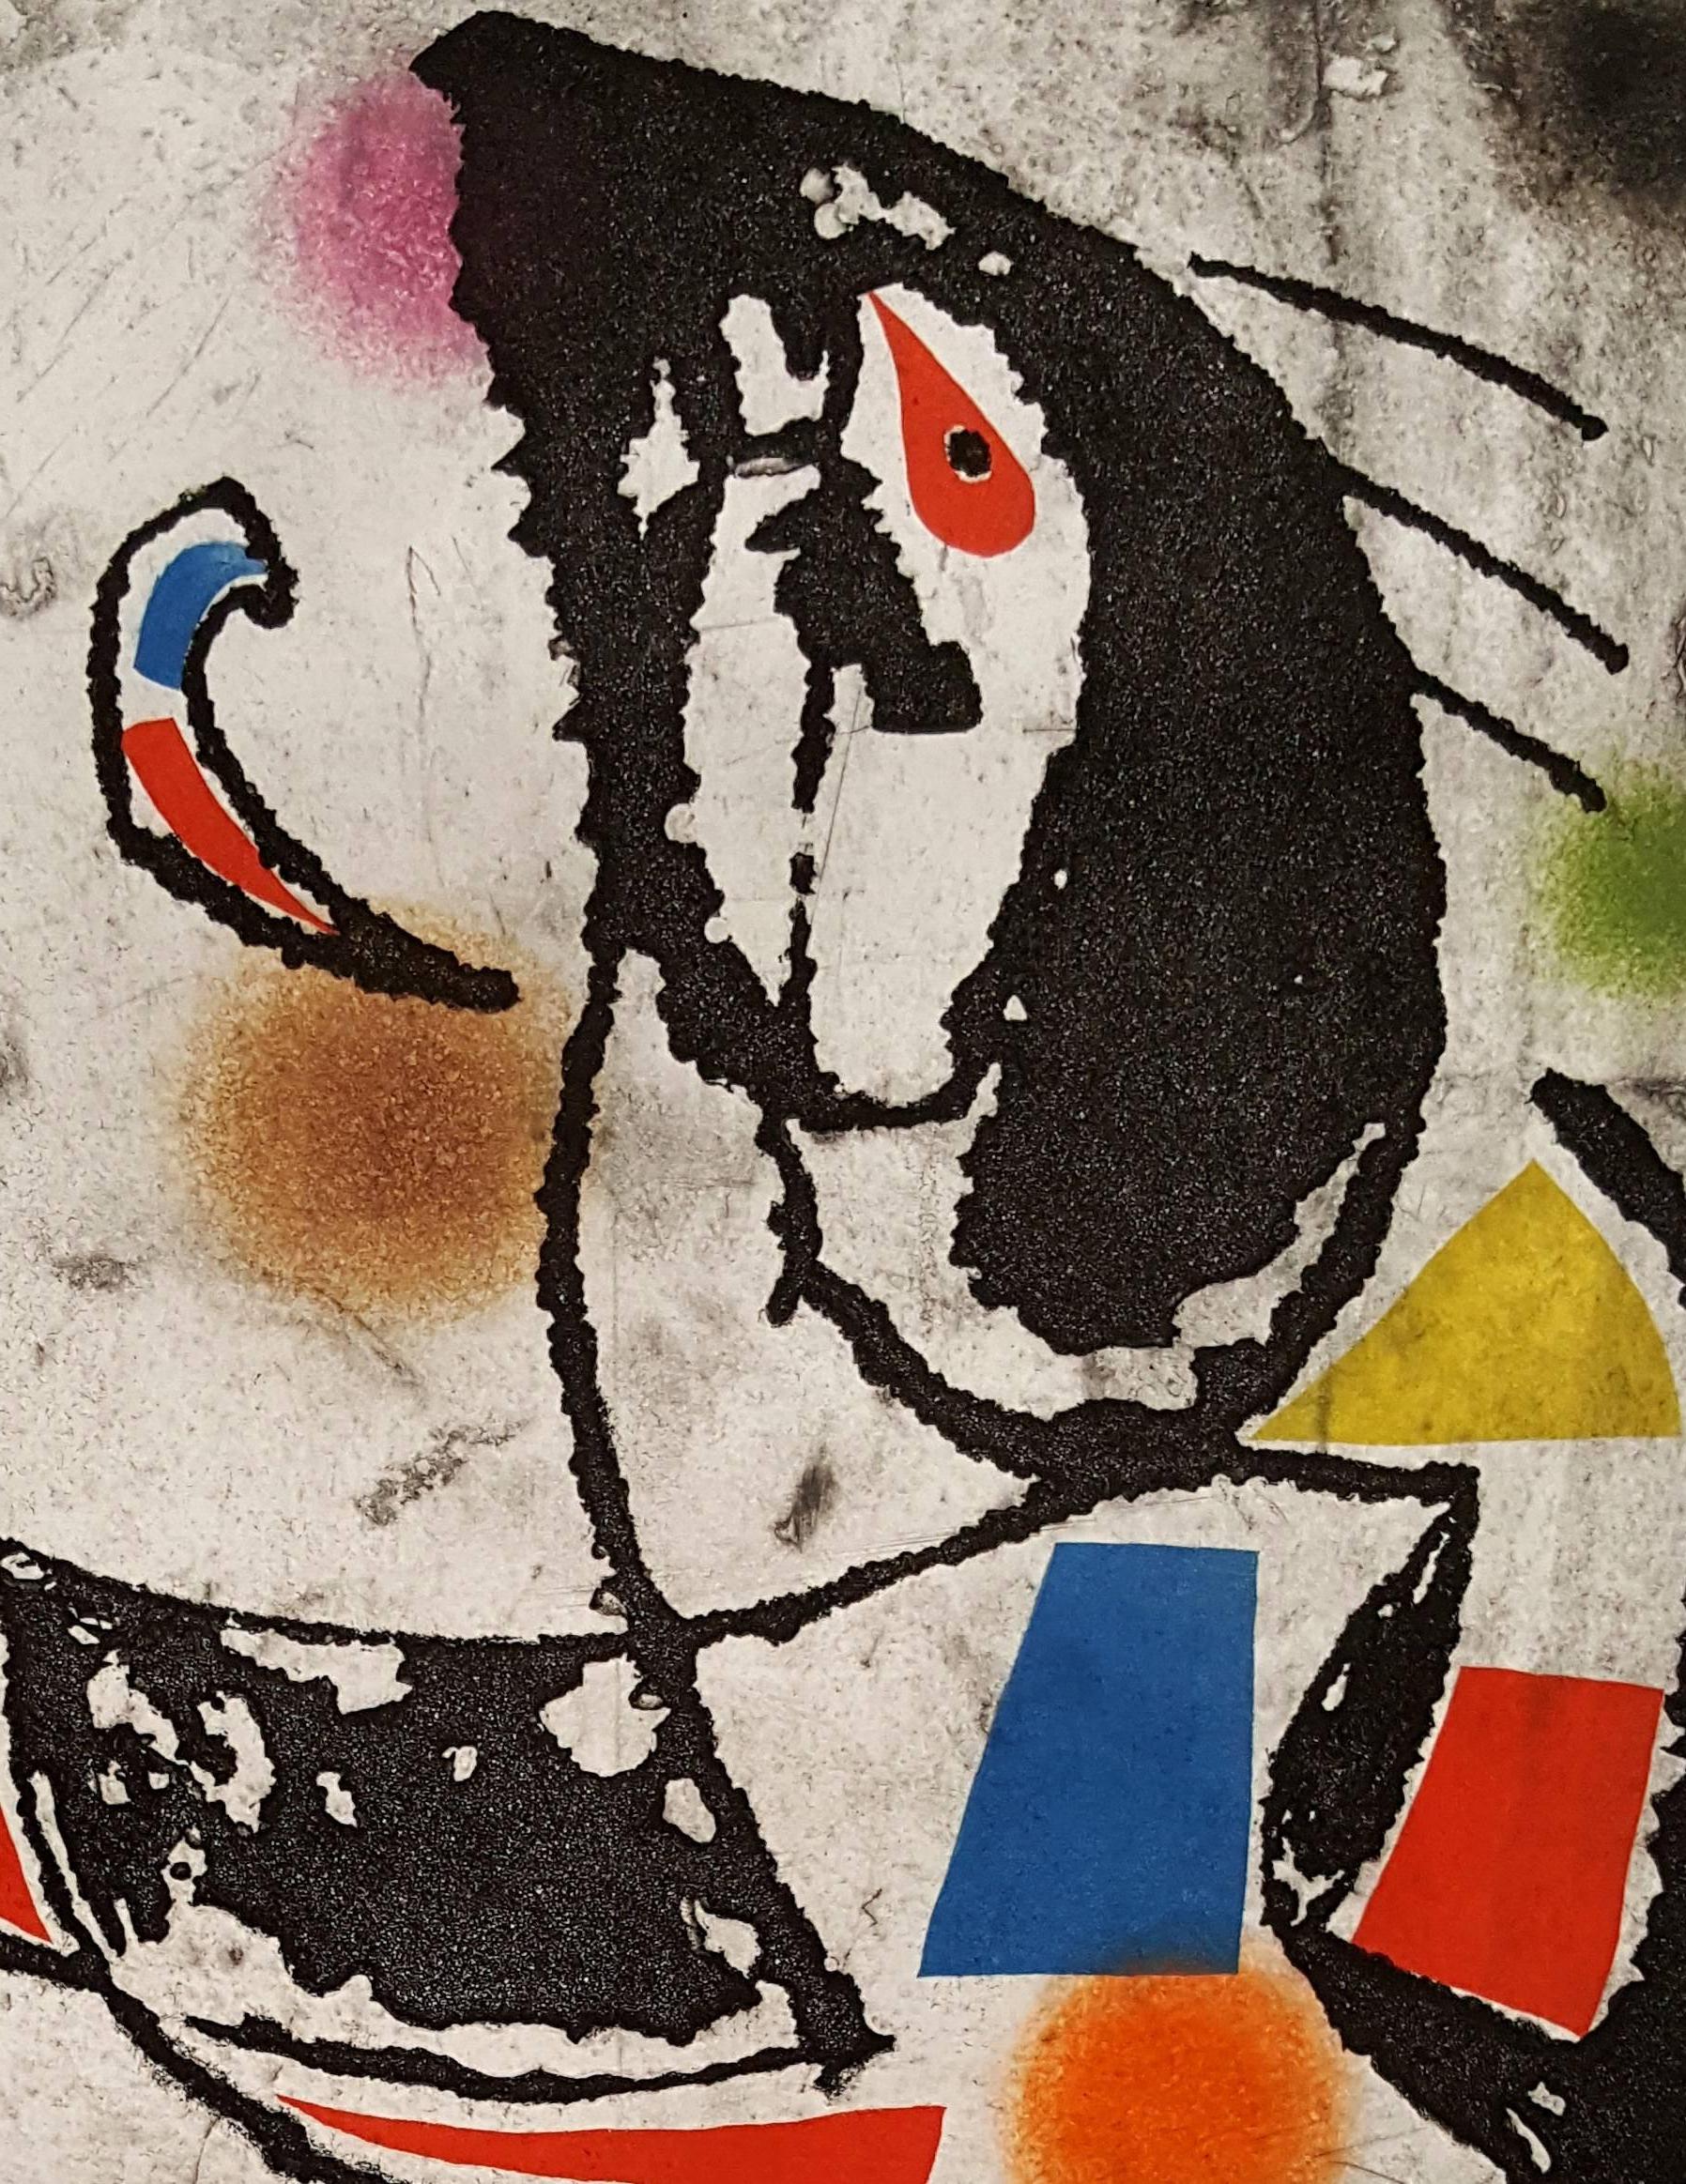 Les Montagnards: one plate - Original Etching - 50 copies - Abstract Print by Joan Miró